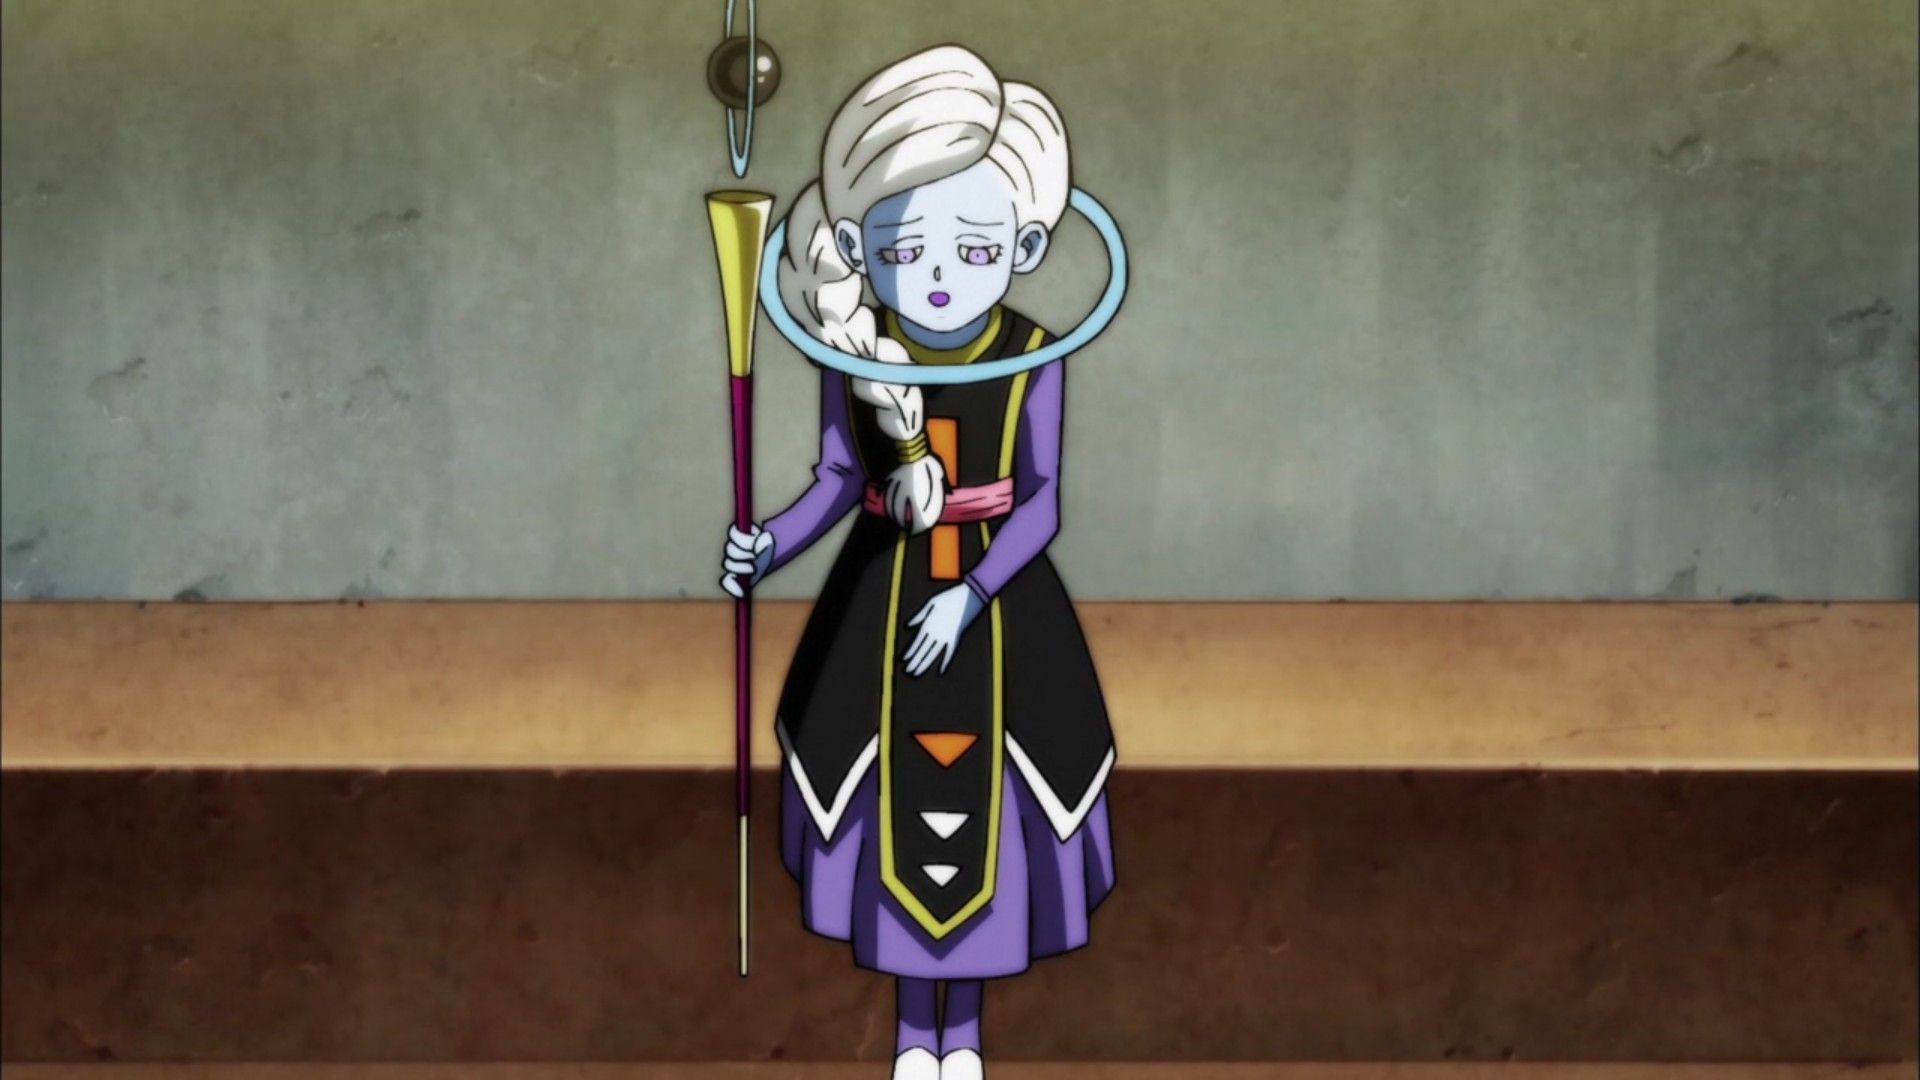 Cus, the oldest of the Grand Priest&rsquo;s children, was sad after her universe was erased (Image via Toei Animation)